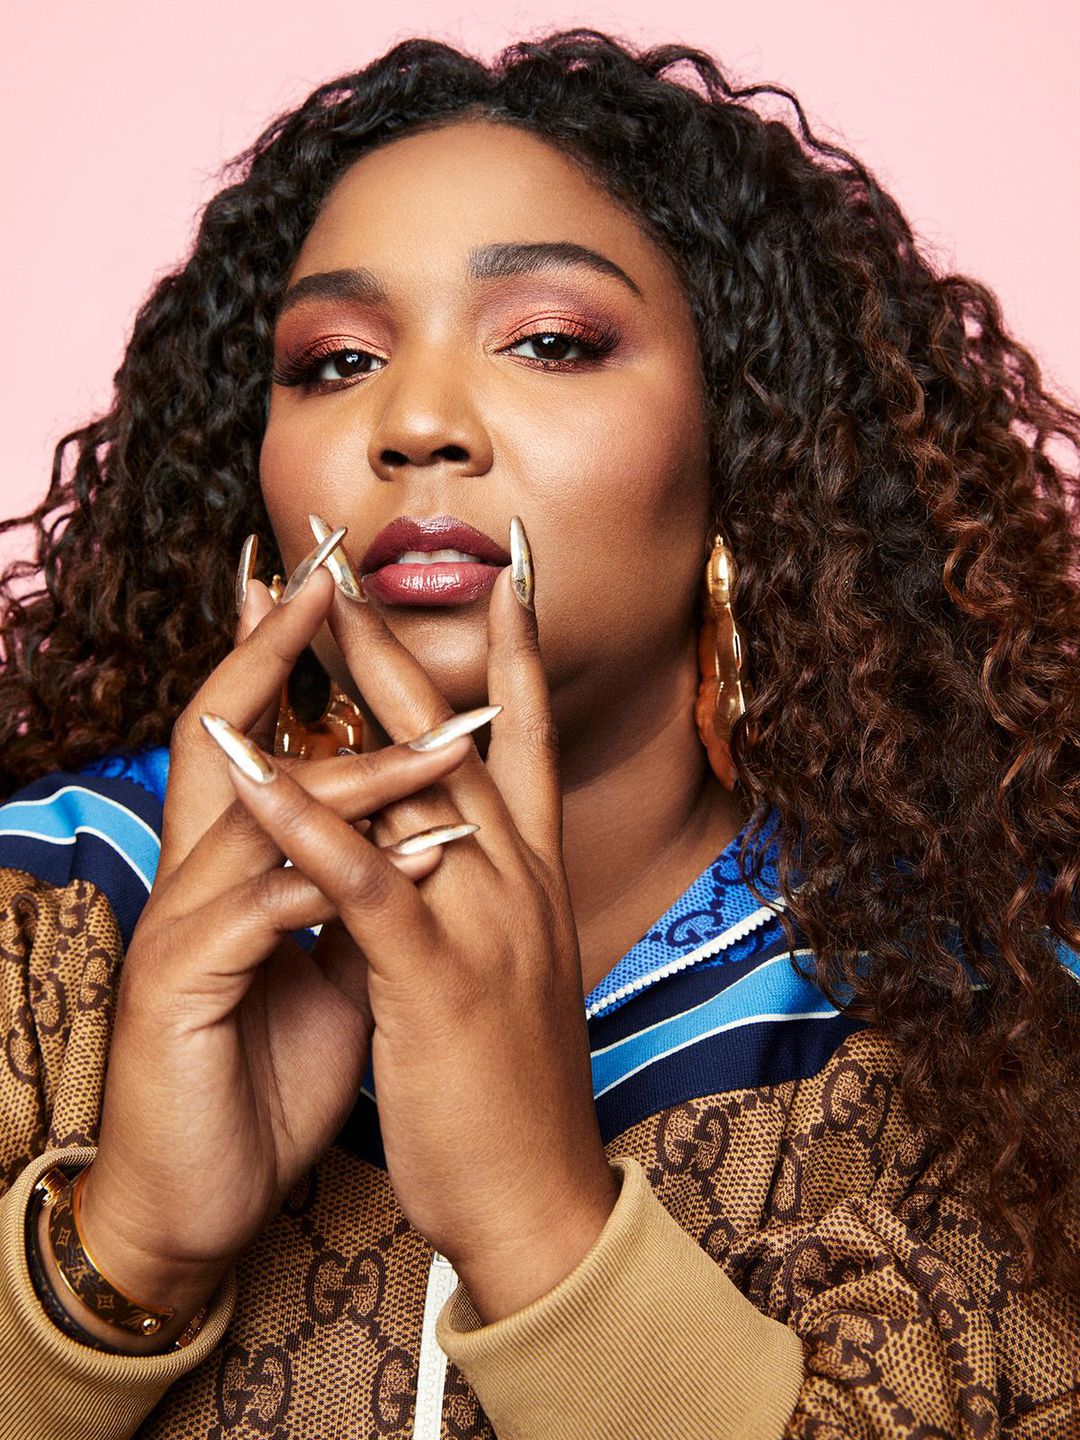 Lizzo unphotoshopped pictures